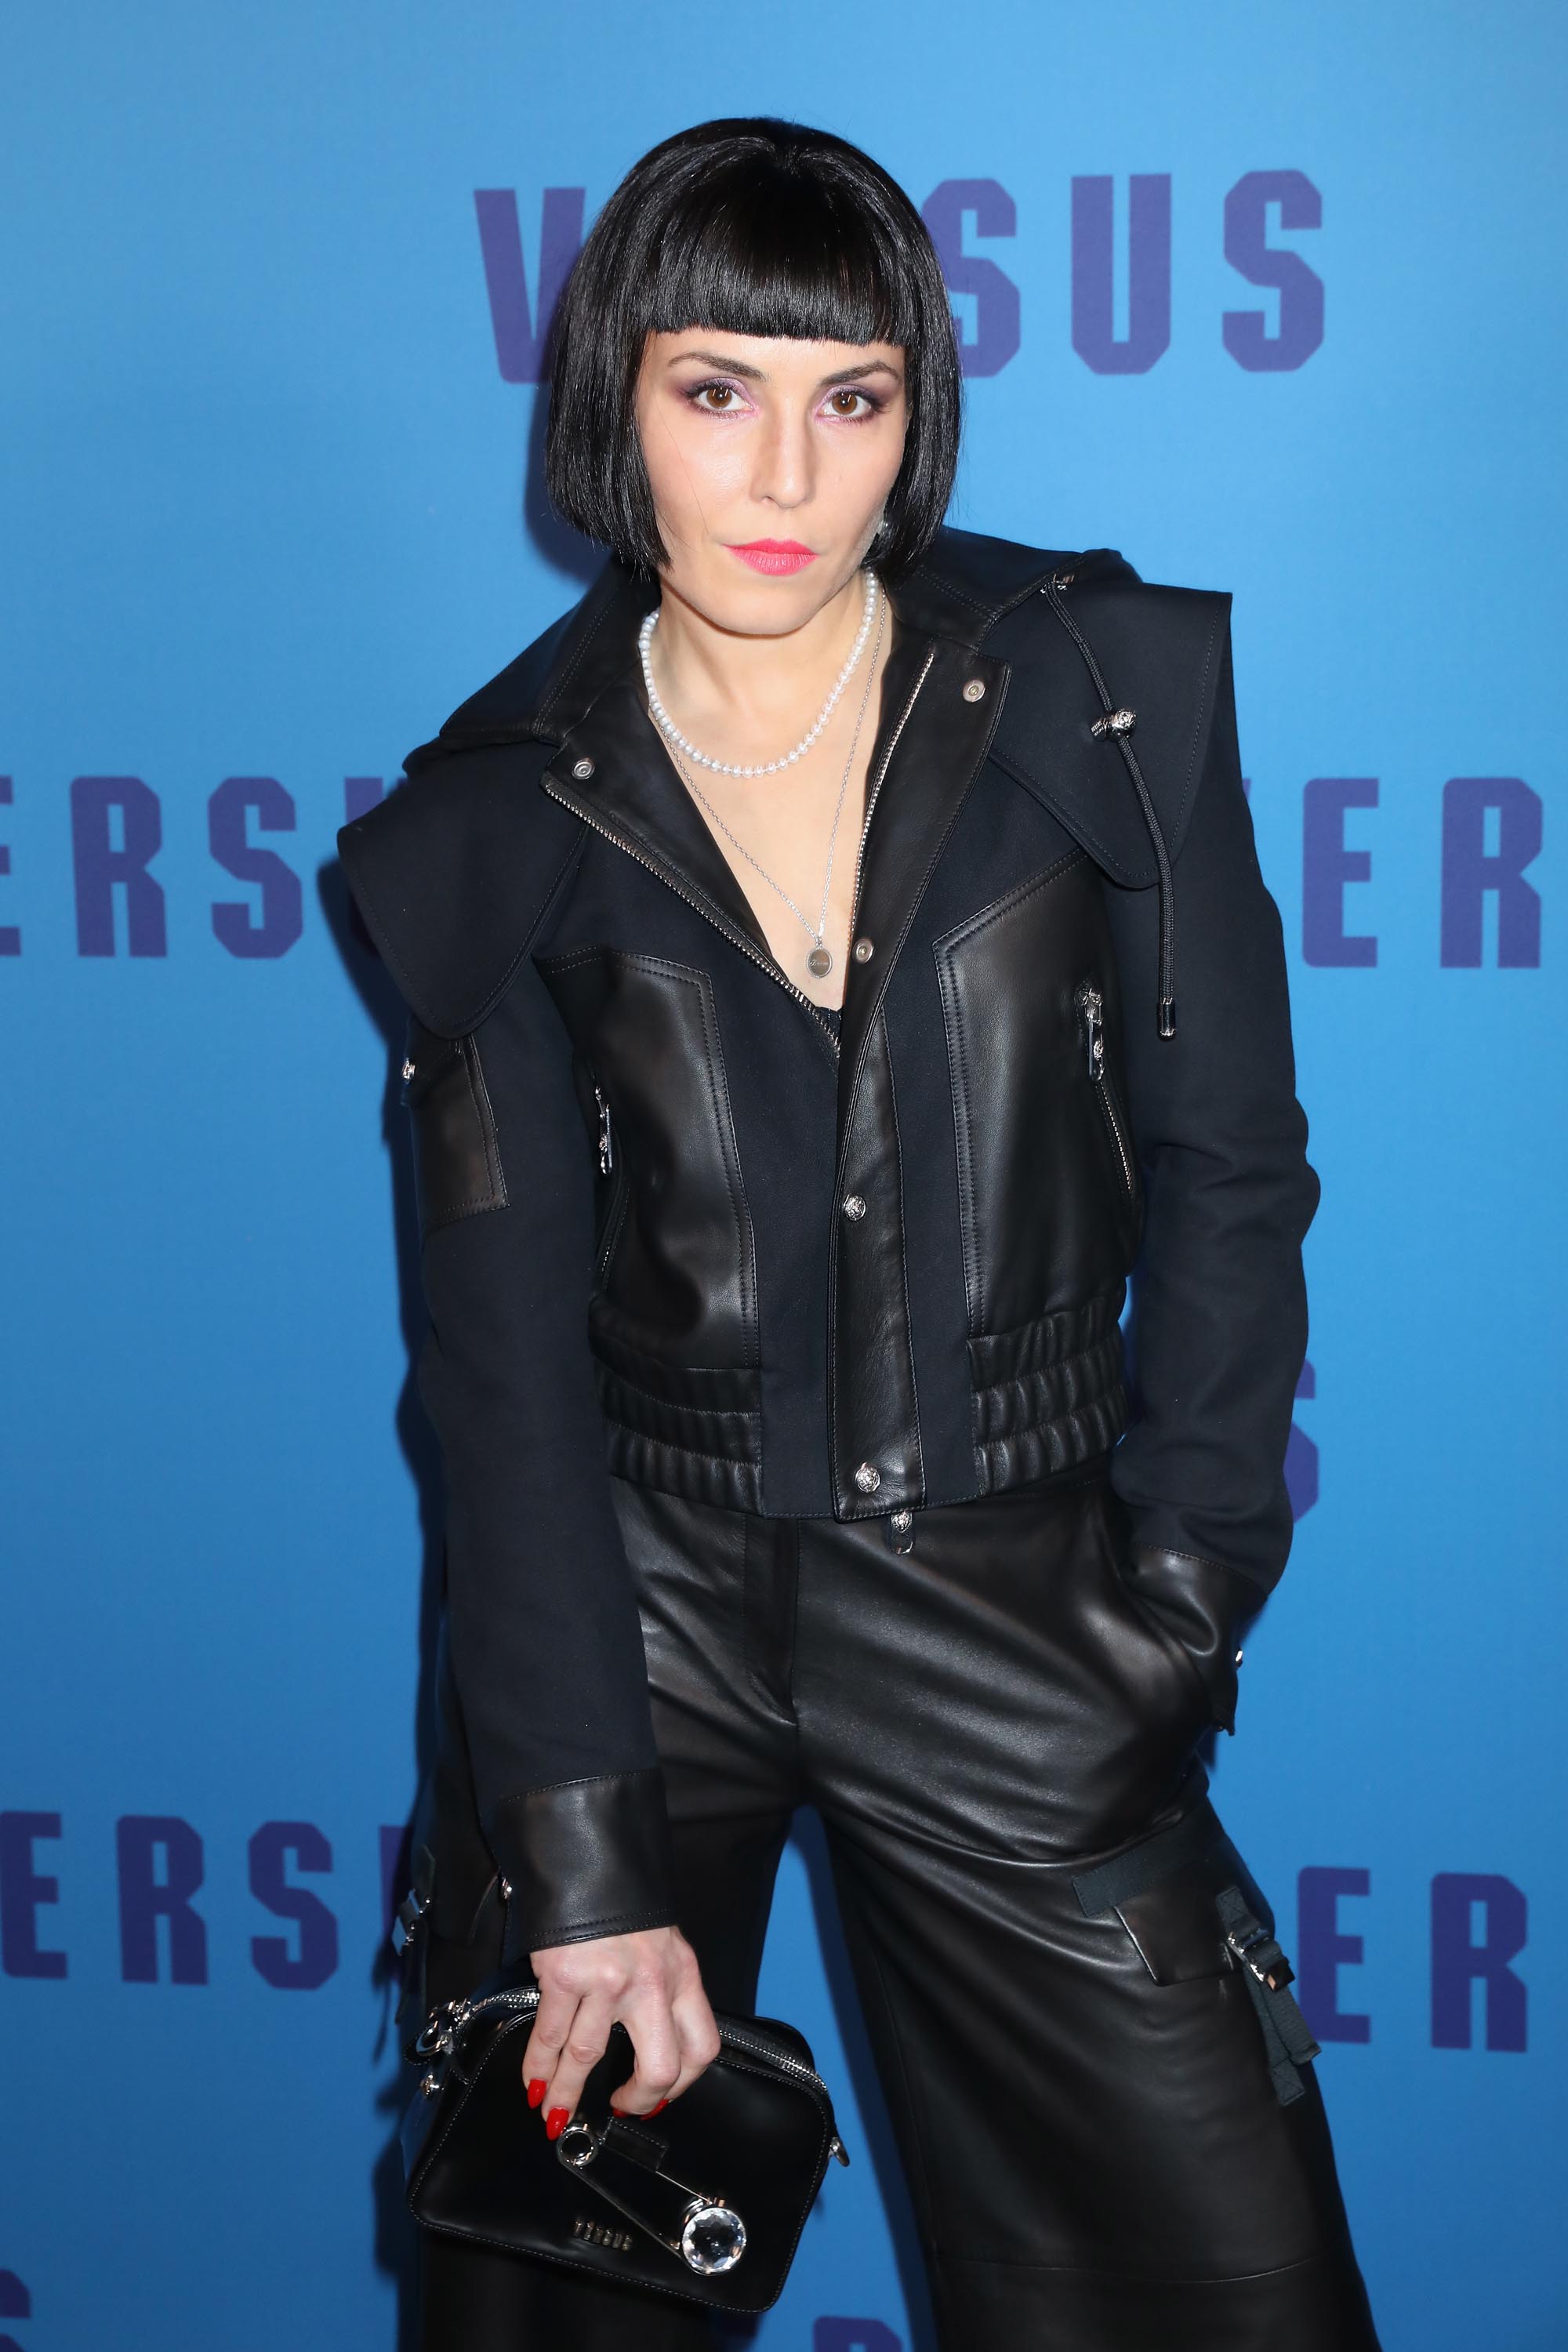 Noomi Rapace attends the VERSUS show